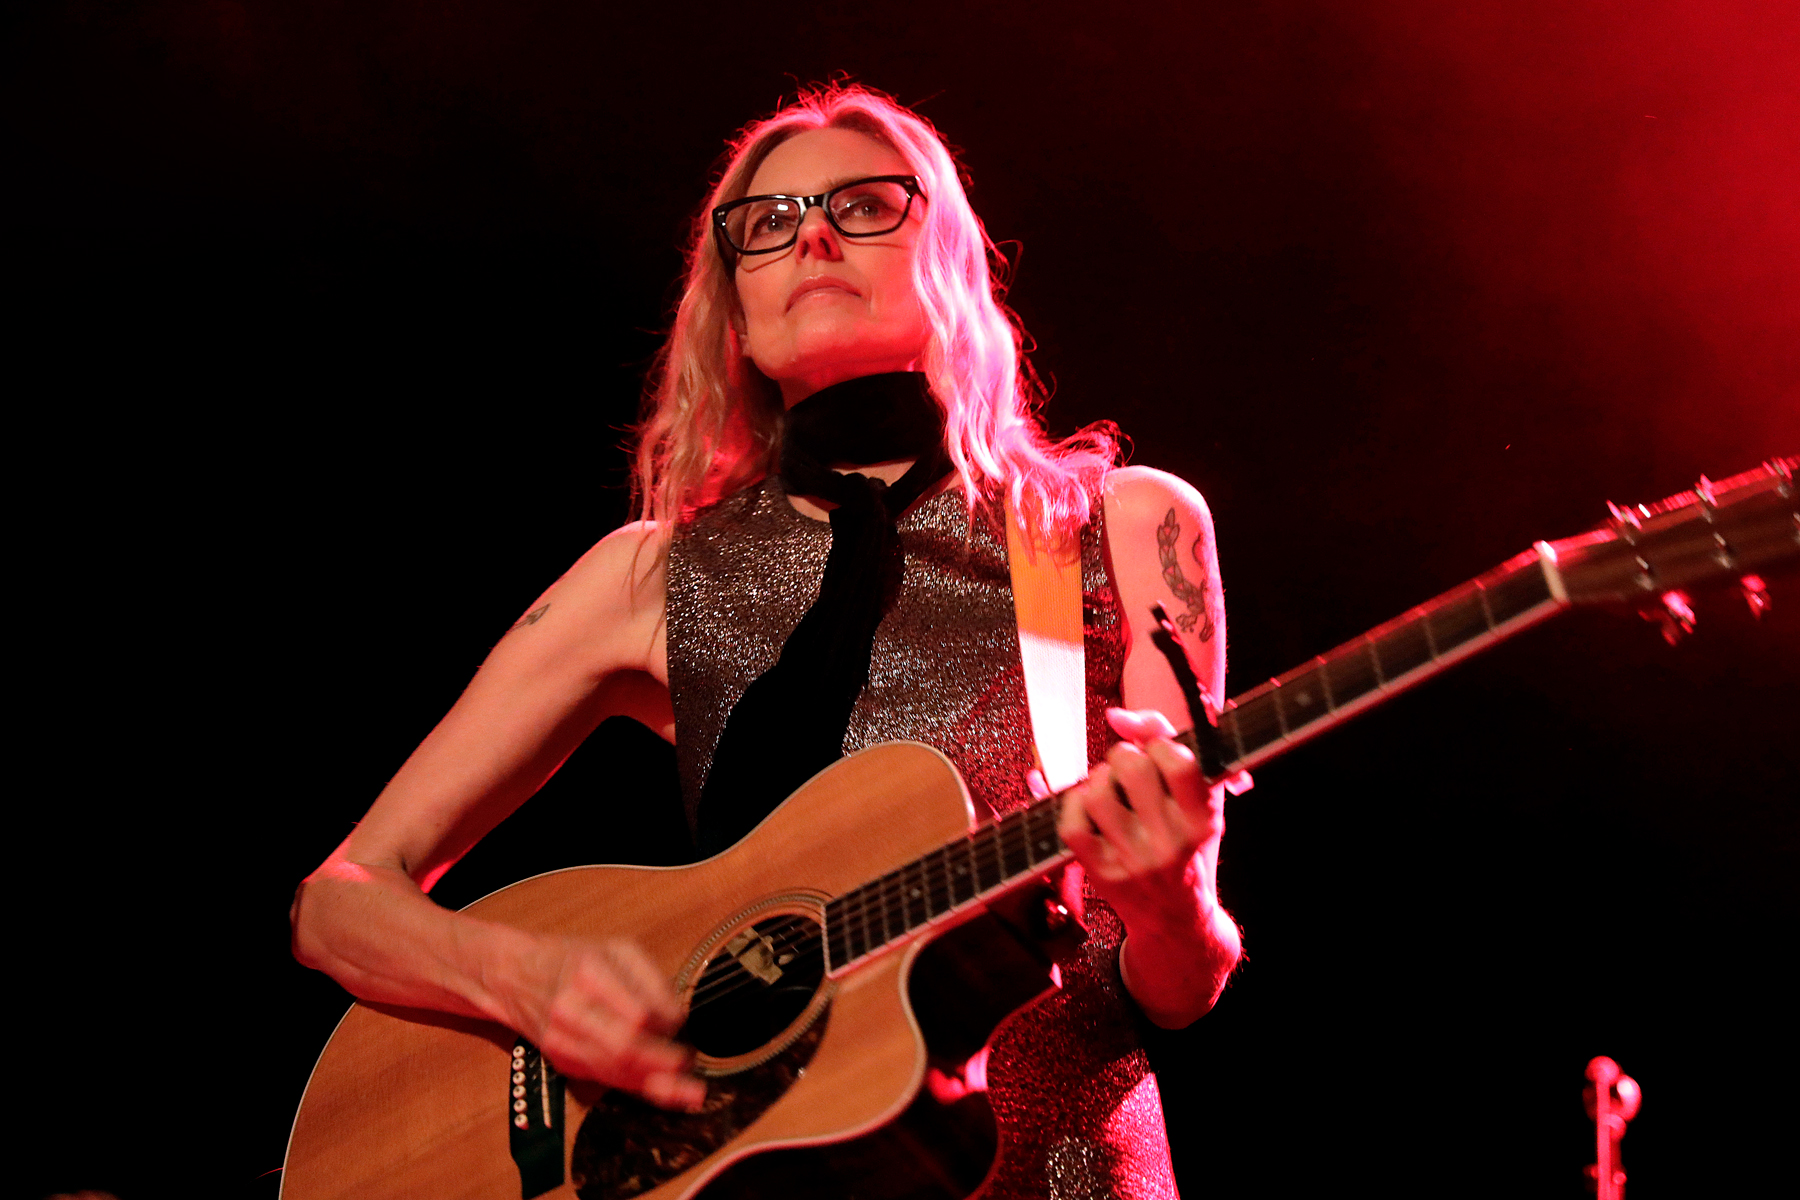 Aimee Mann performing on October 24th, 2017.